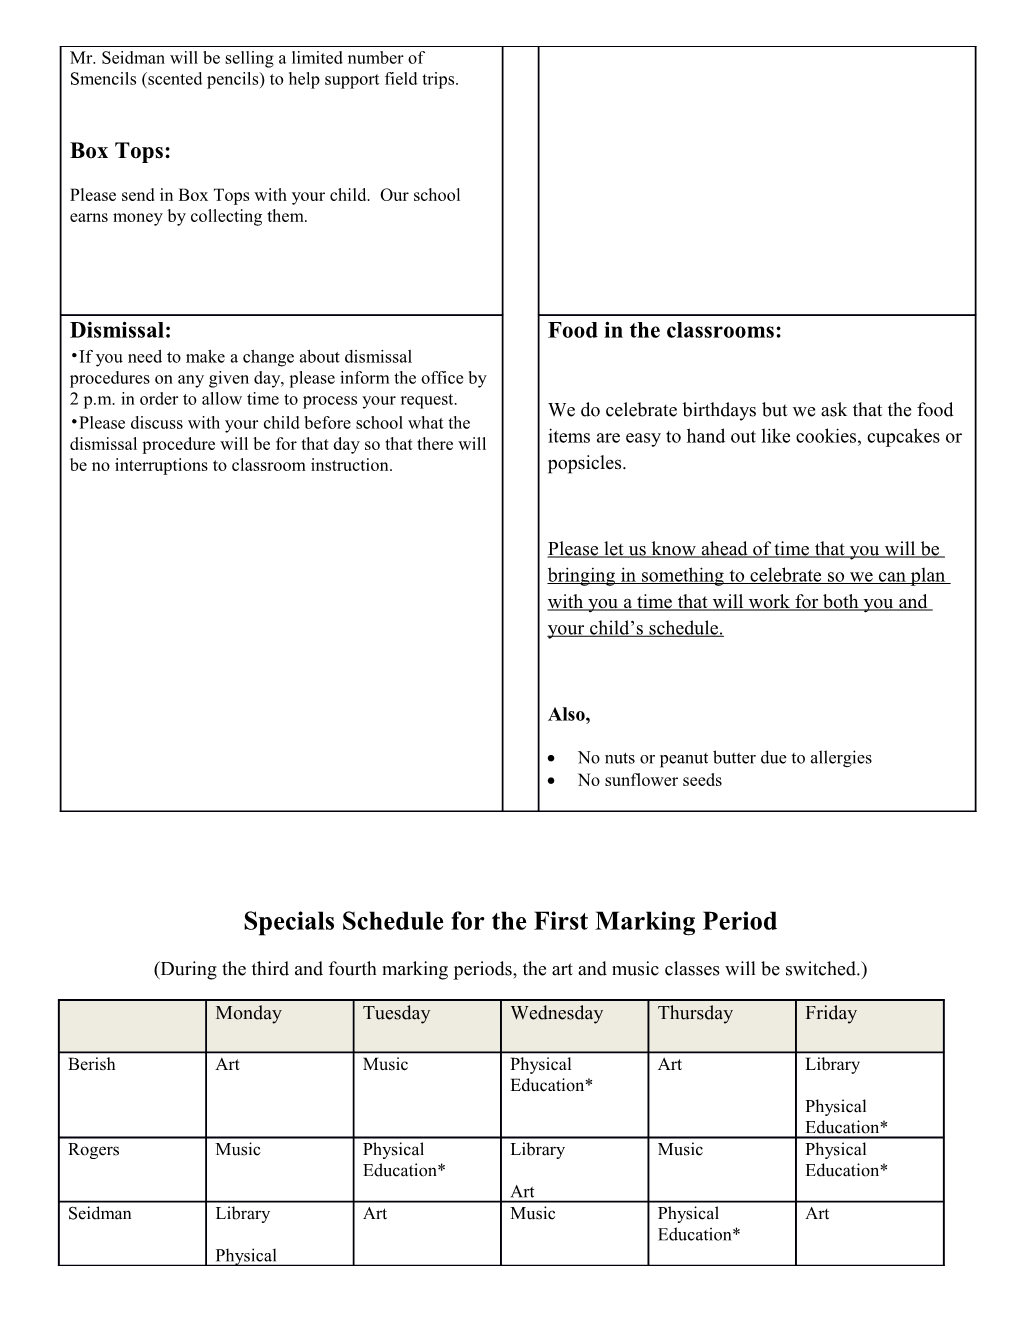 Specials Schedule for the First Marking Period s1